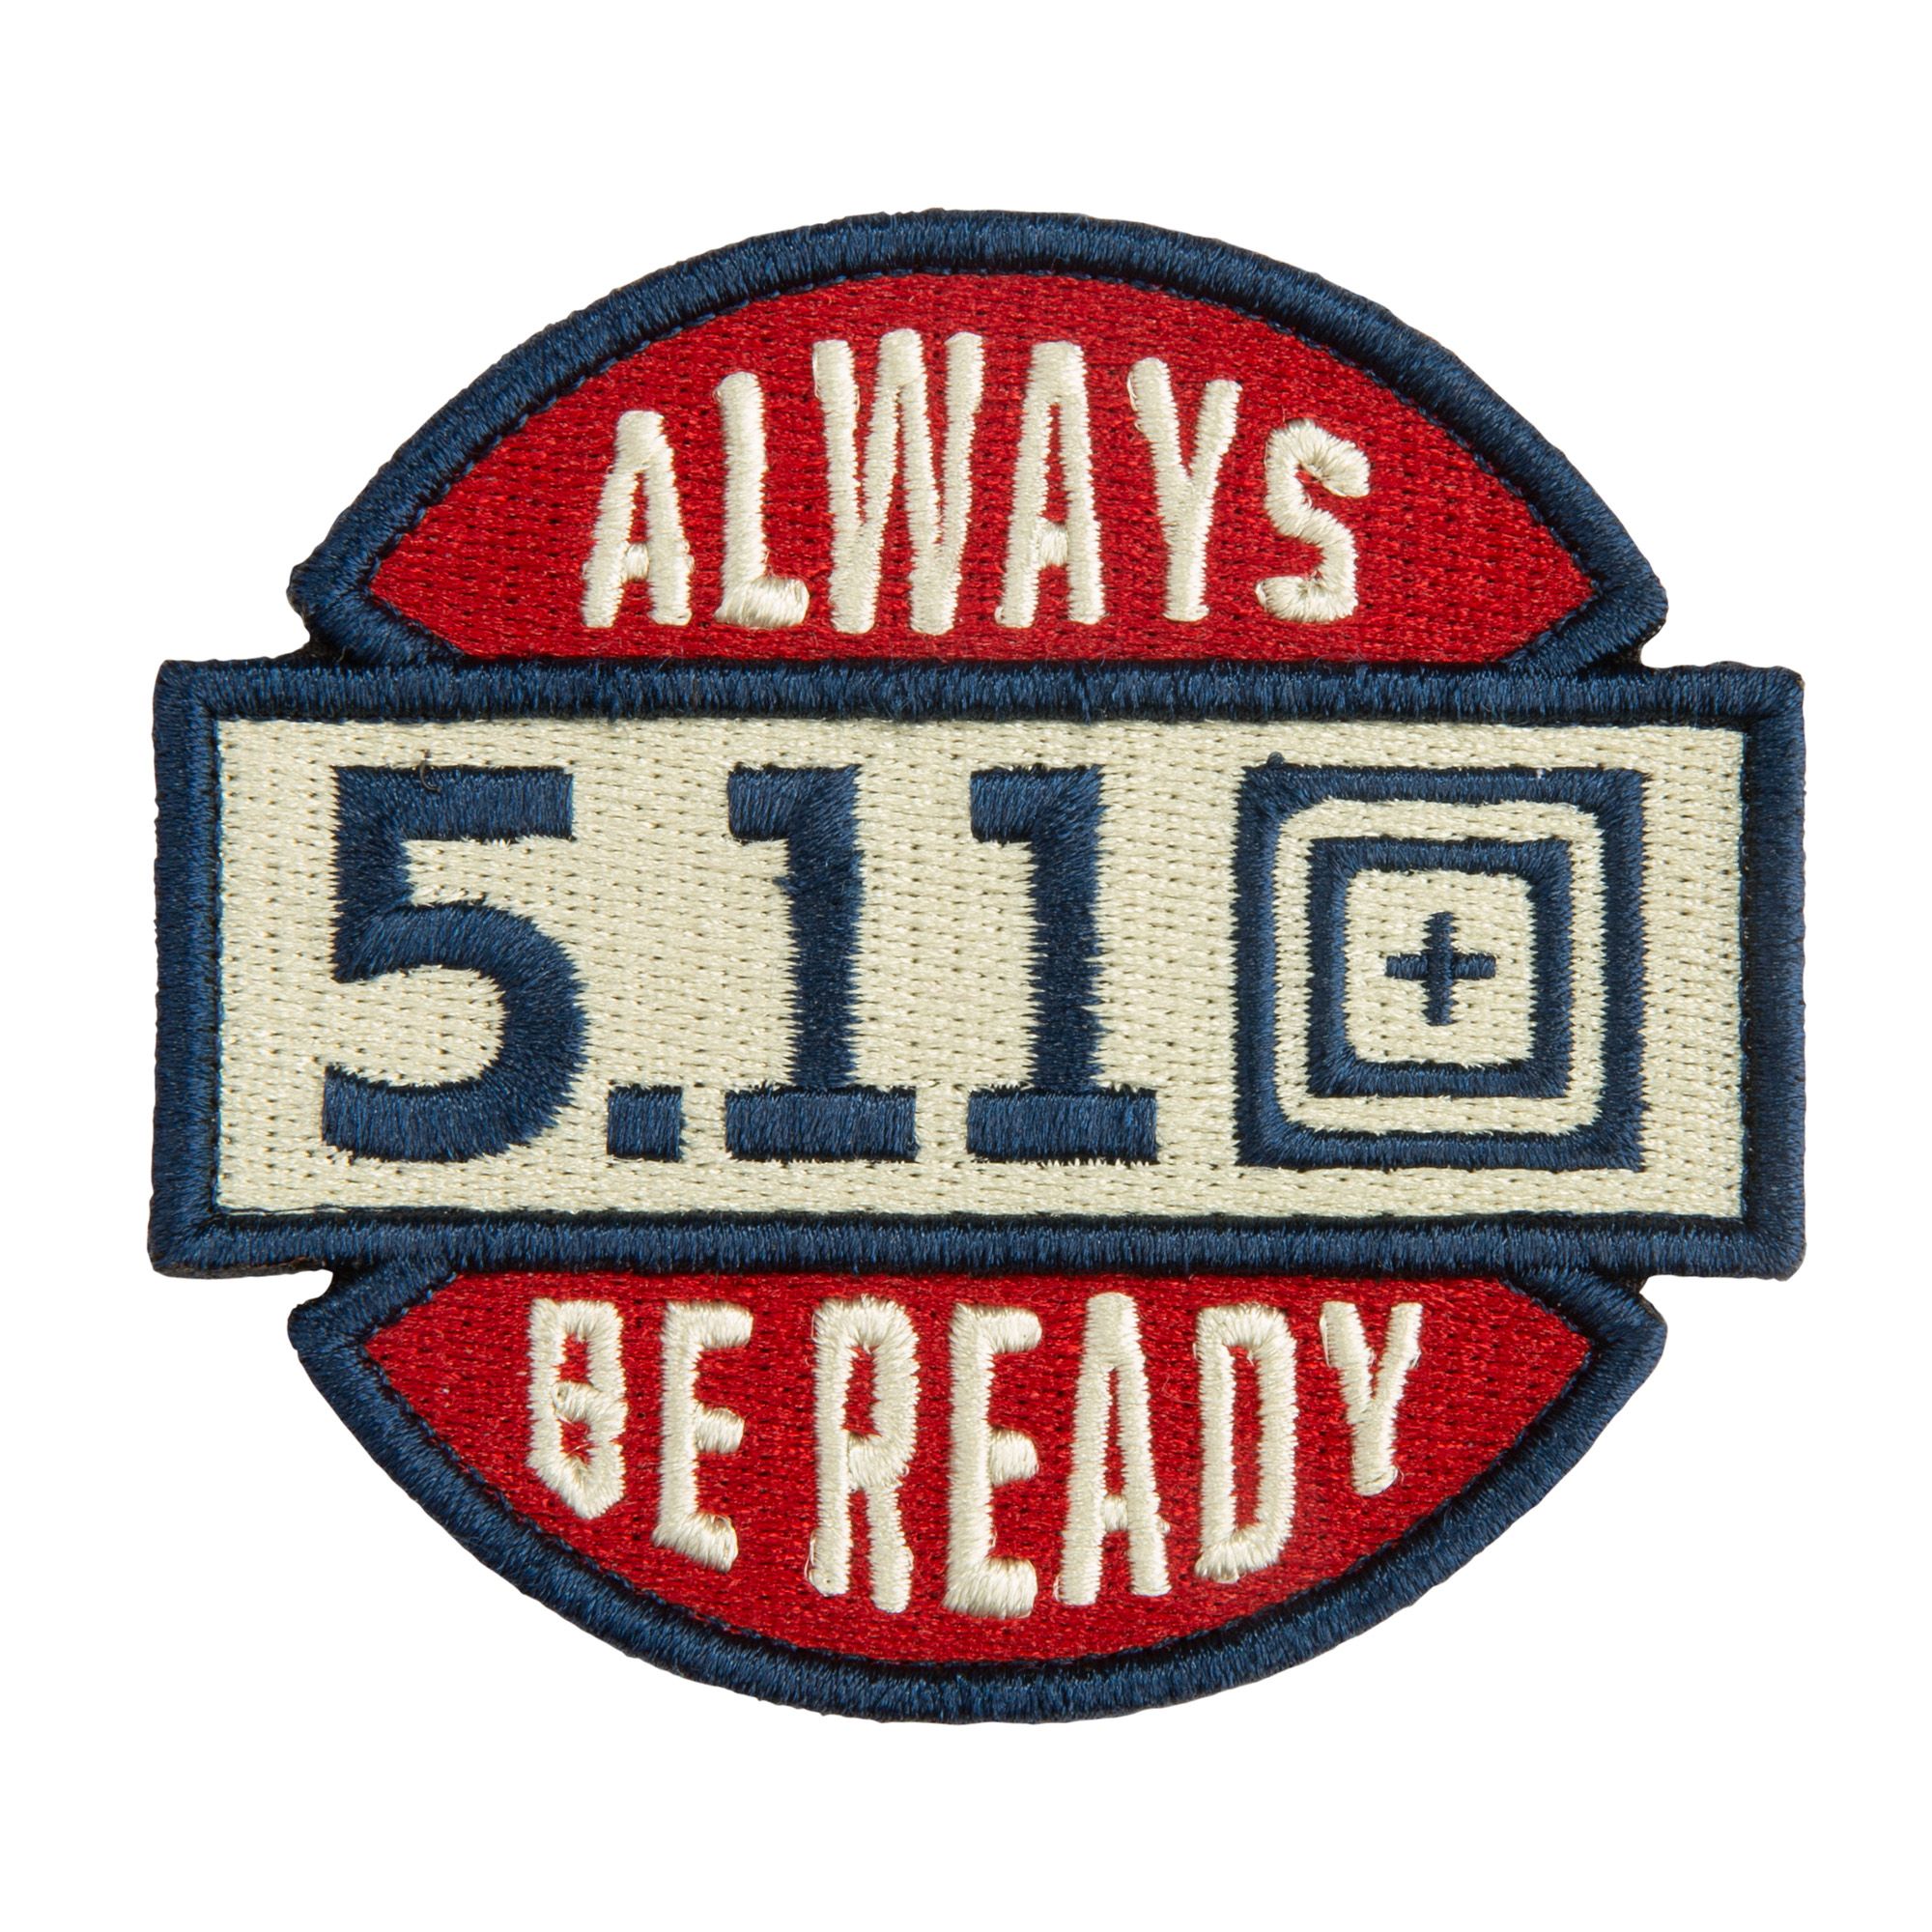 ALWAYS BE READY PATCH - ONLINE EXCLUSIVE